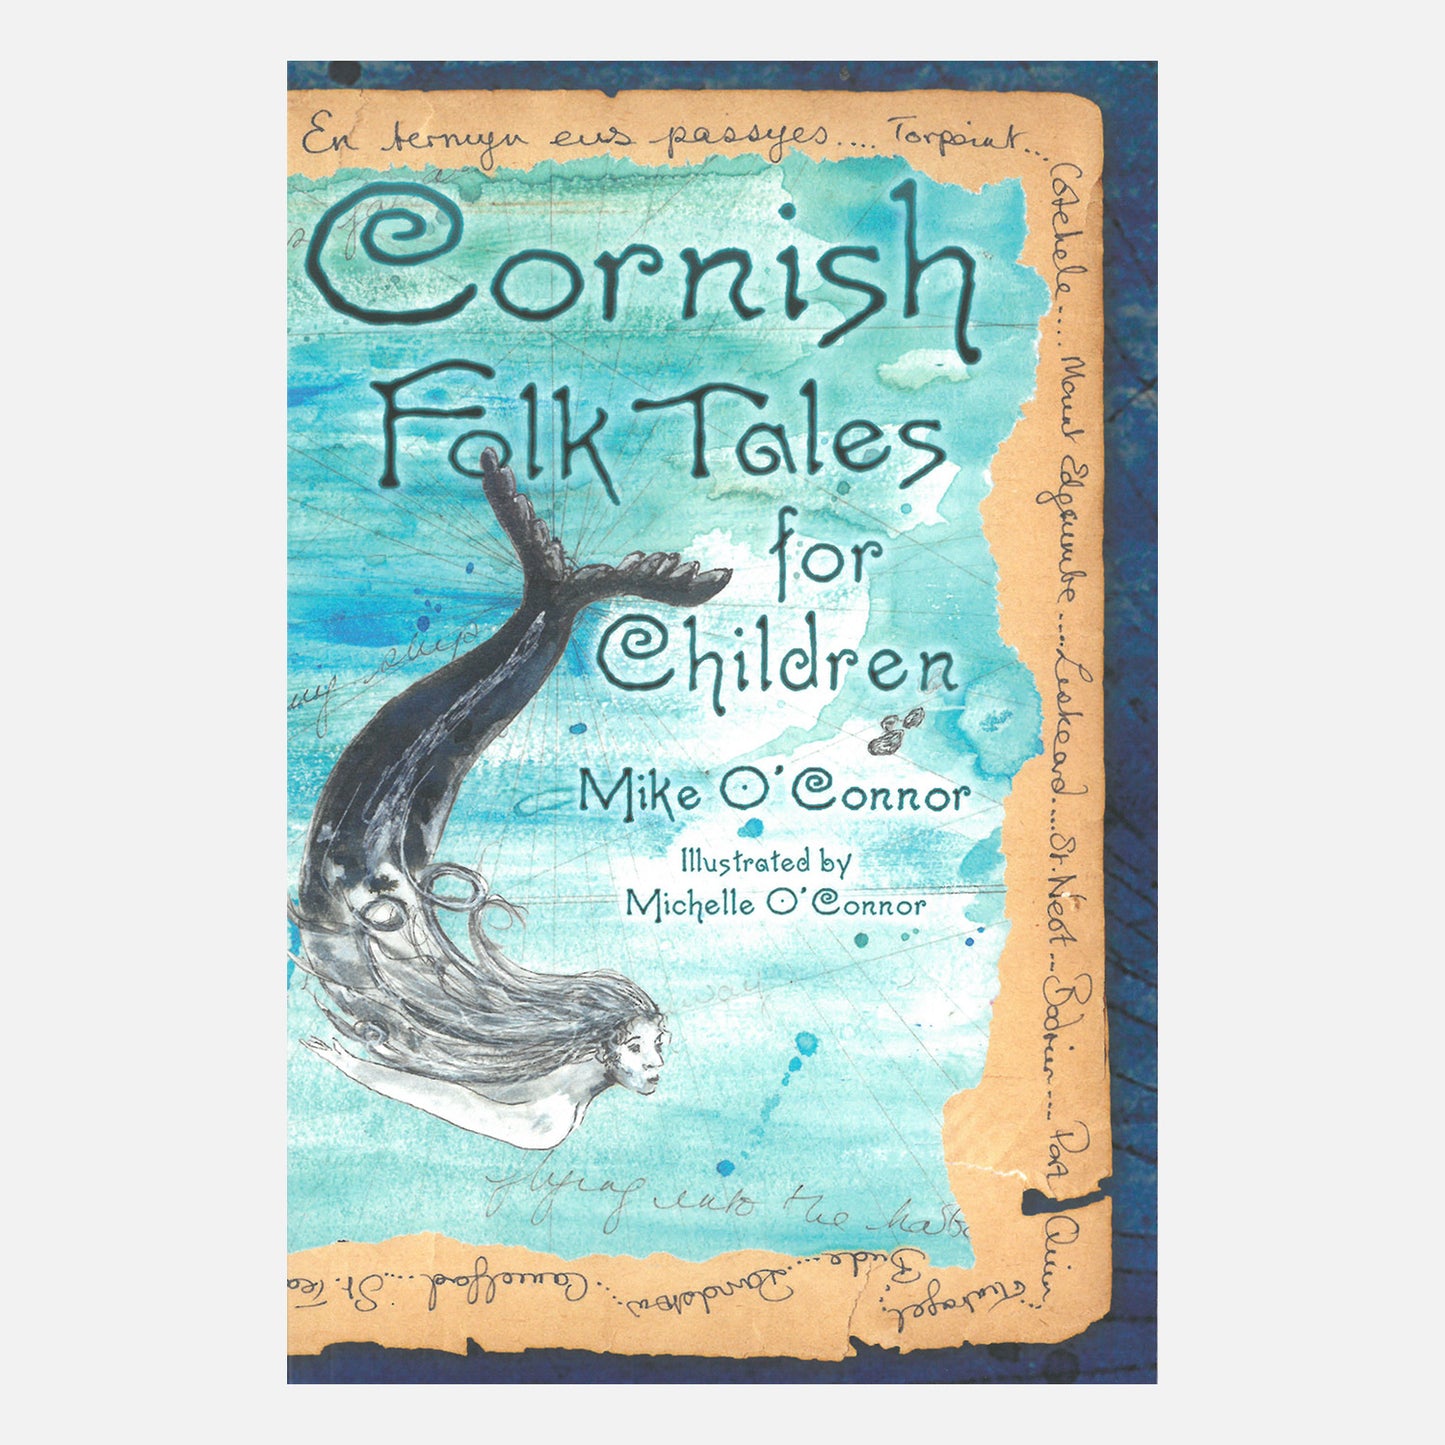 Cornish Folk tales for children with a blue map and a mermaid on the over